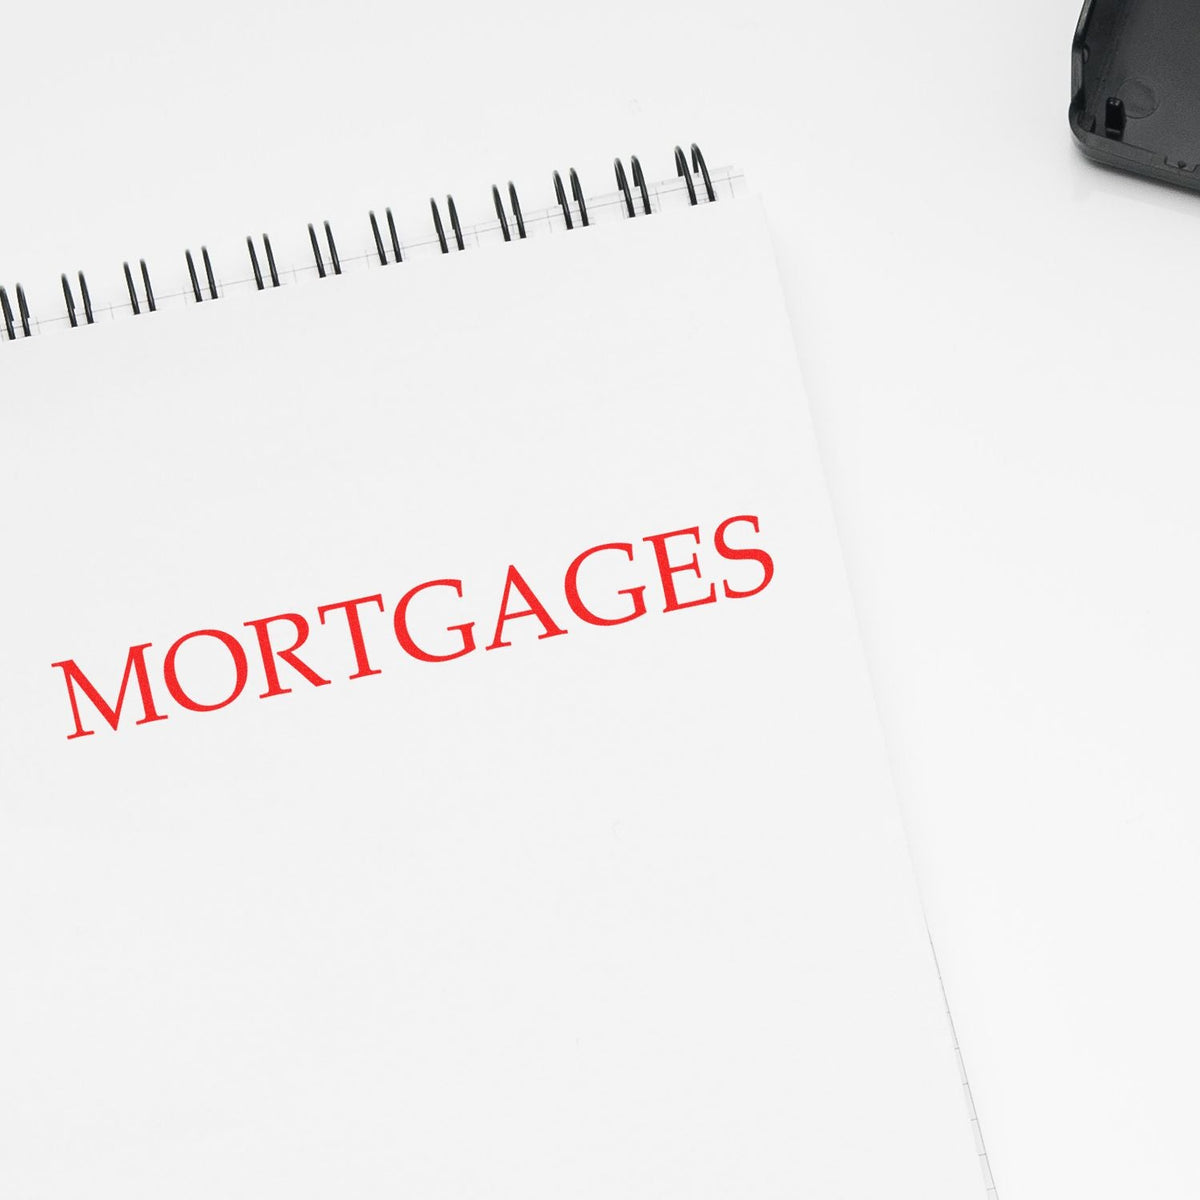 Self Inking Mortgages Stamp In Use Photo